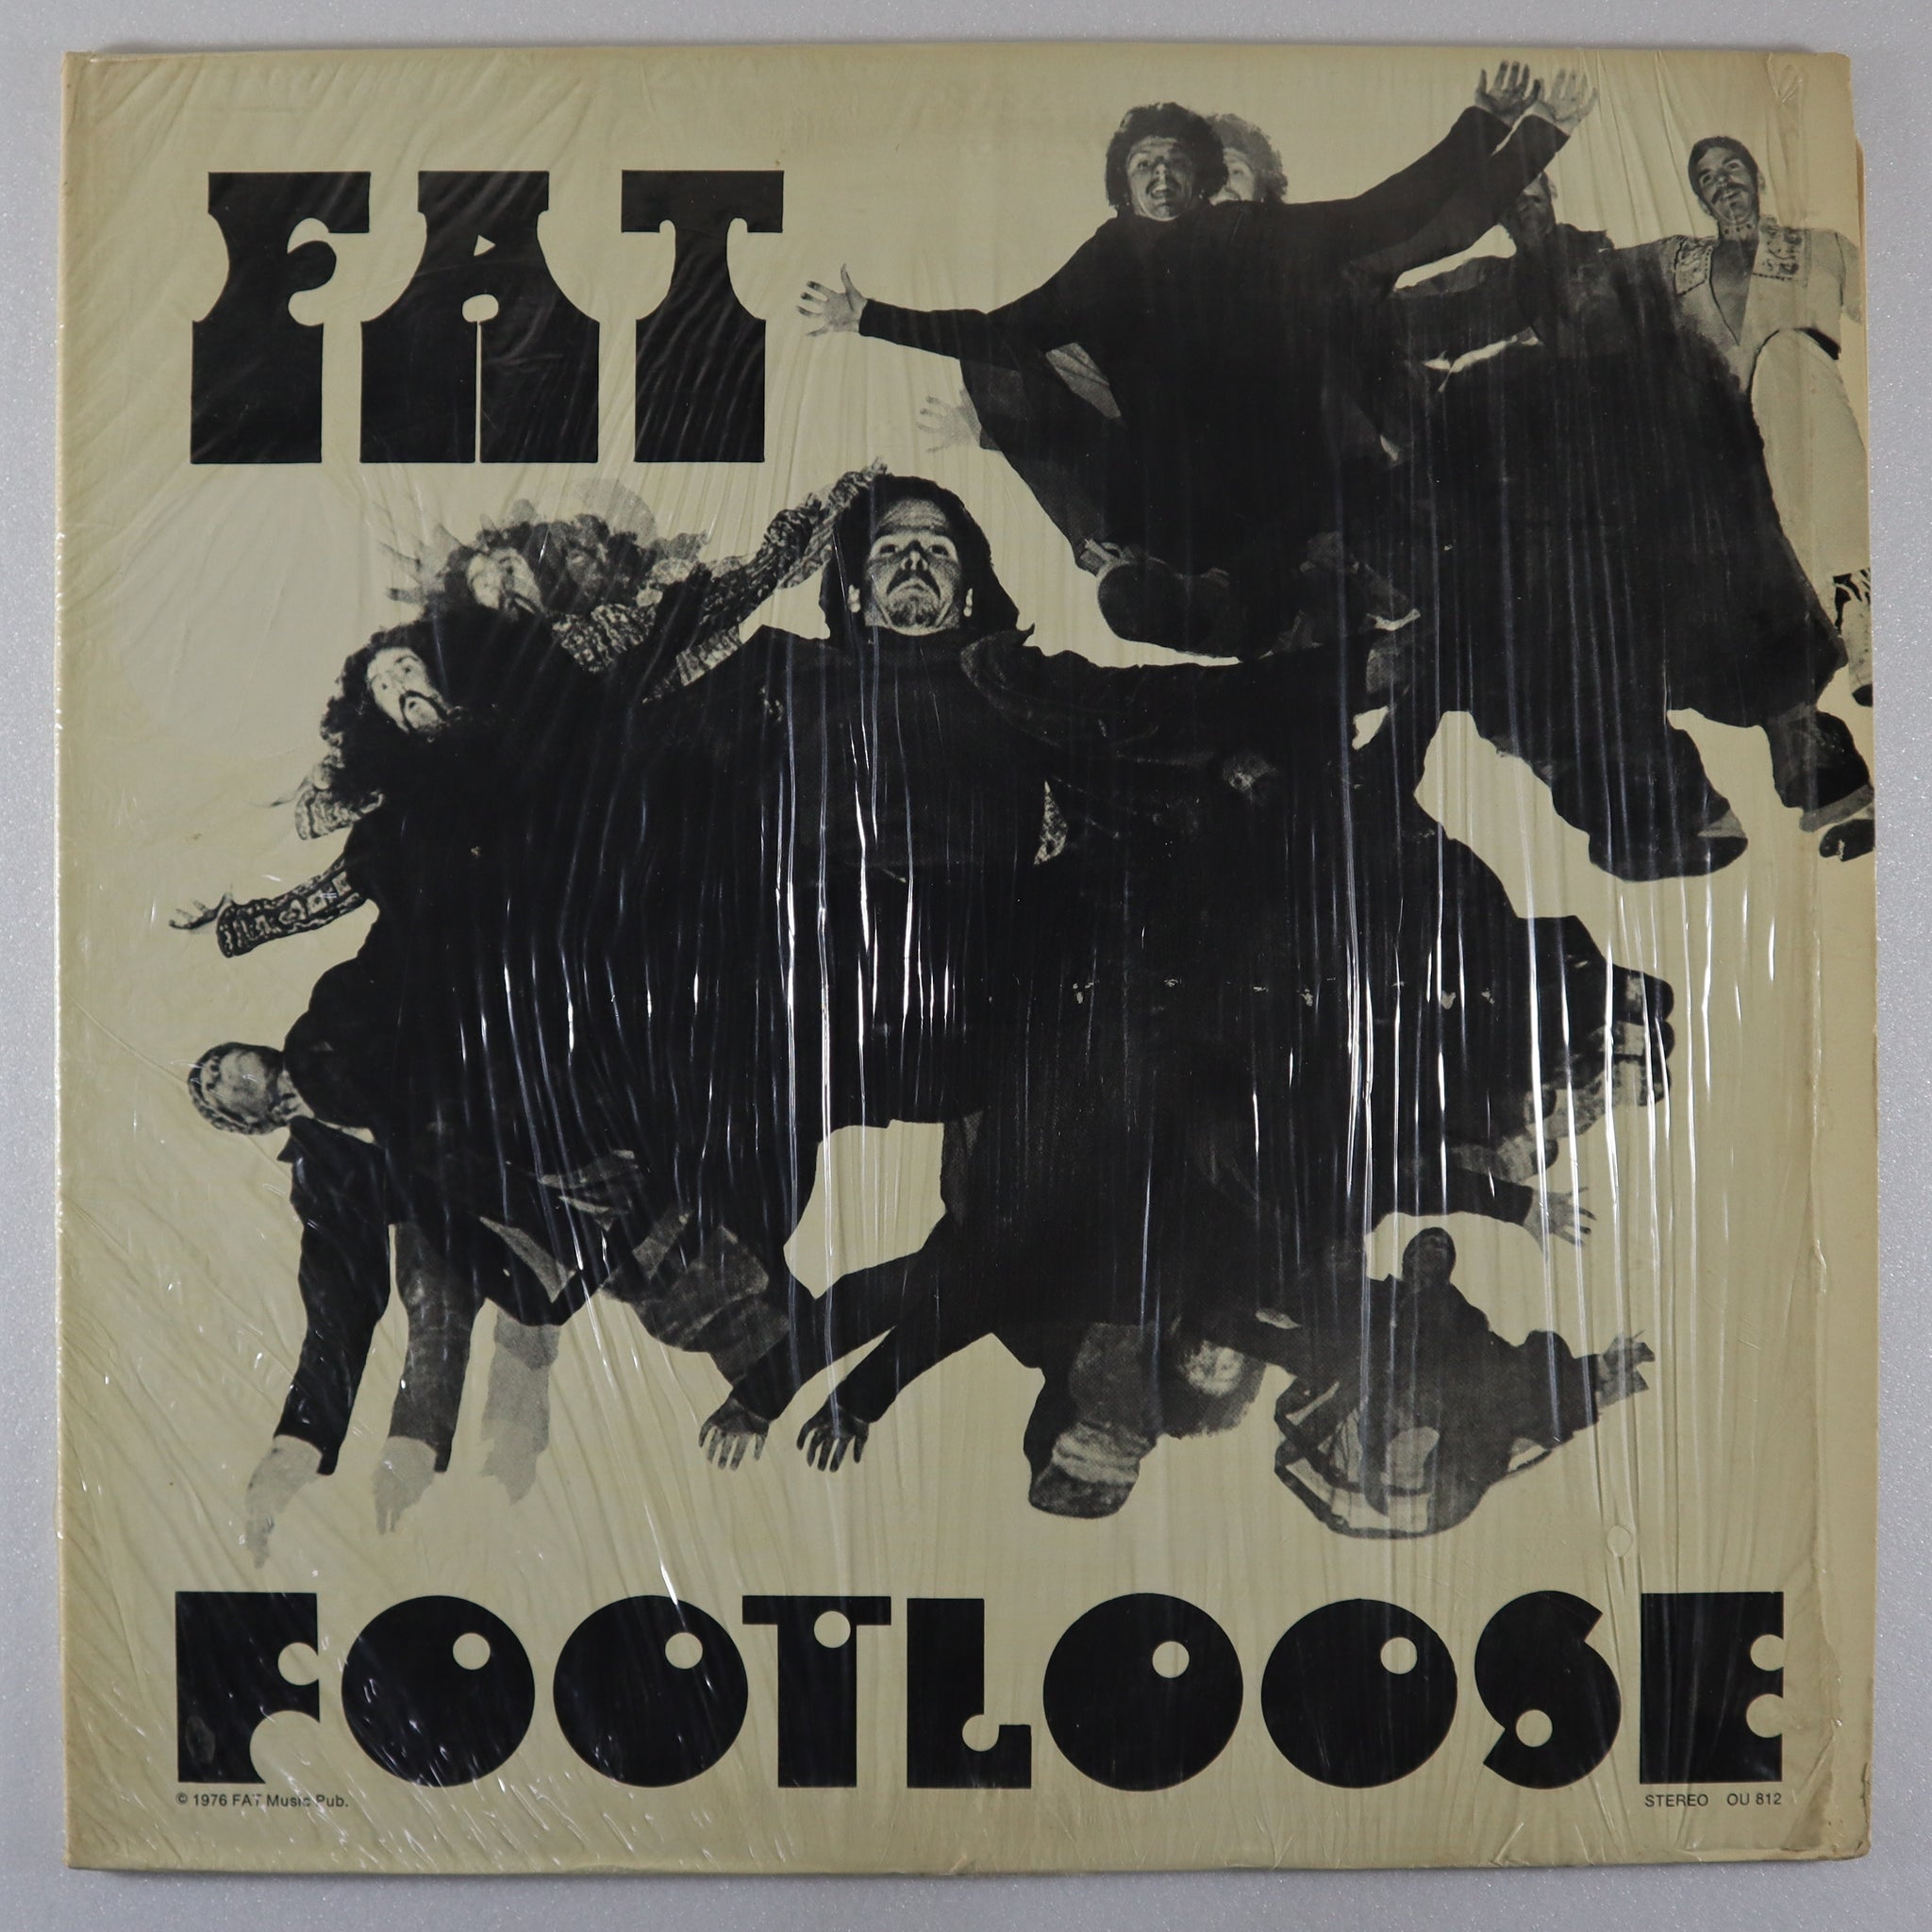 FAT – Footloose – out there records